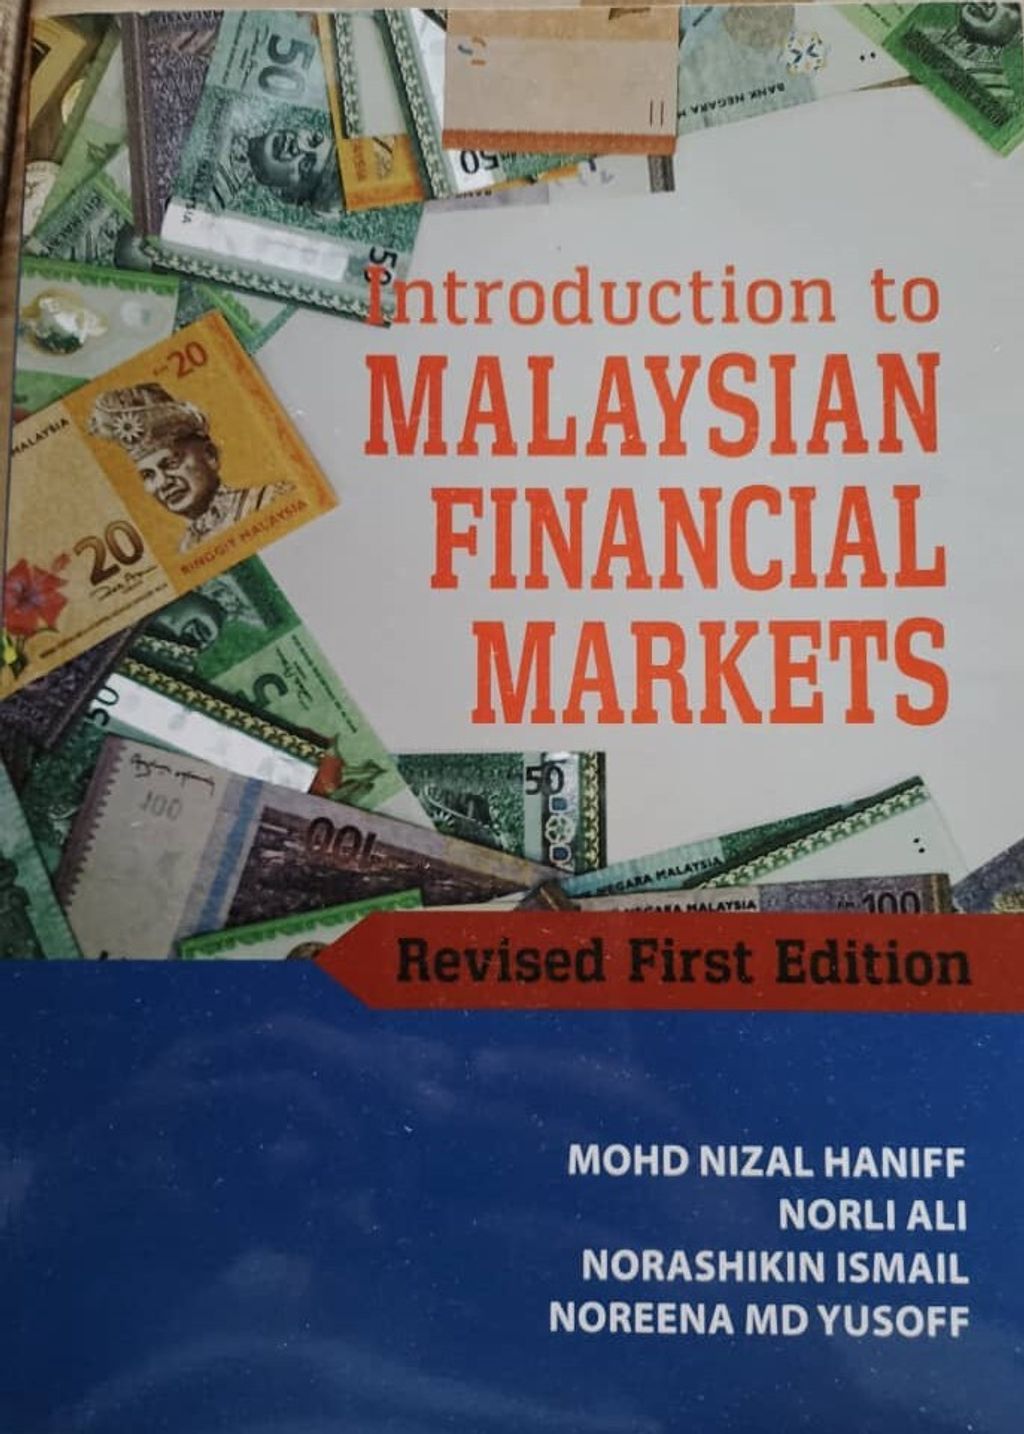 Introduction to Malaysian Markets